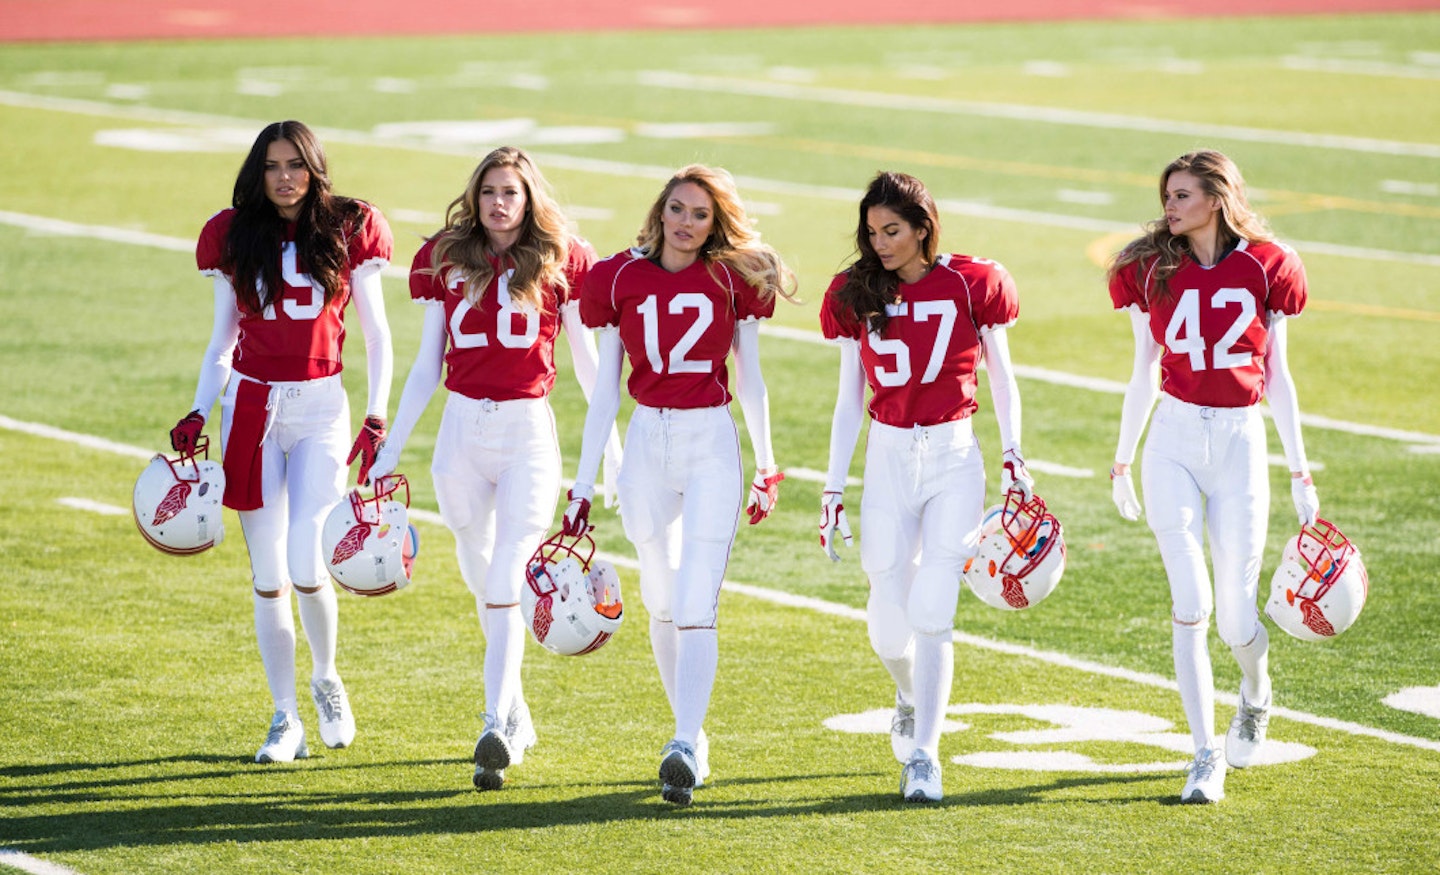 VIDEO: Victoria's Secret Angels Play Football For Super Bowl V-Day Ad